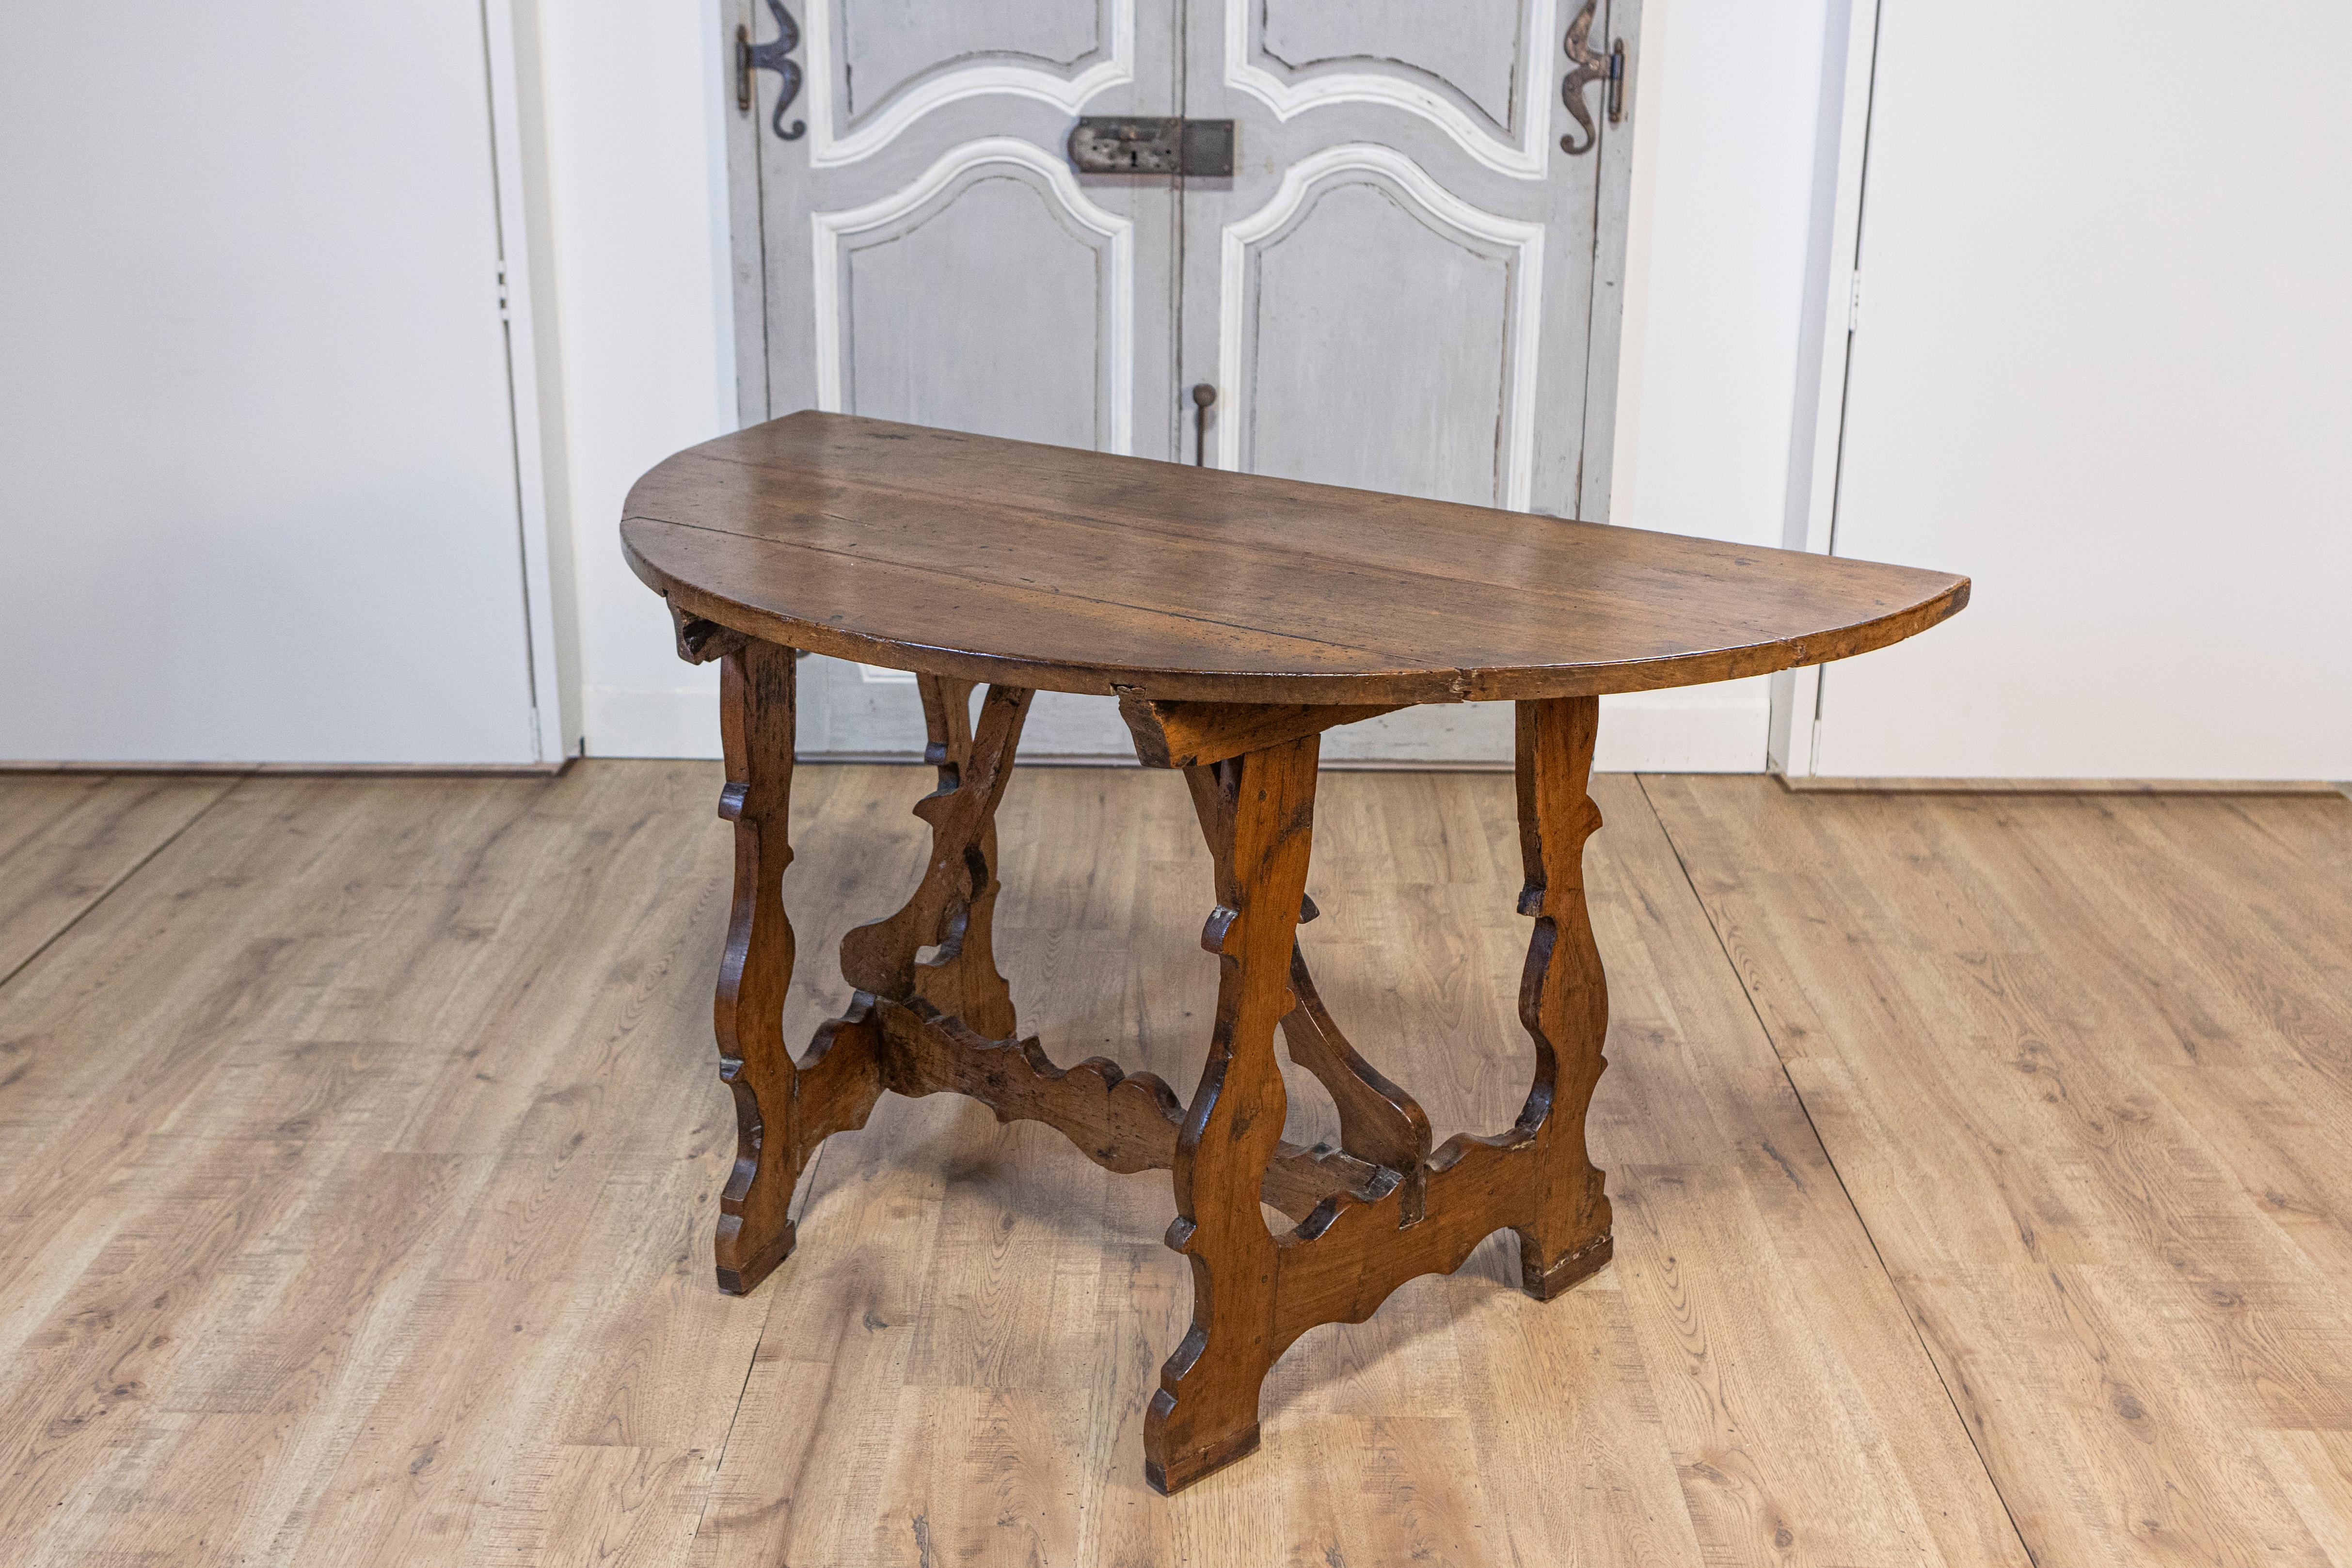 17th Century Italian Baroque Period Walnut Demilune Table with Carved Lyre Base For Sale 11